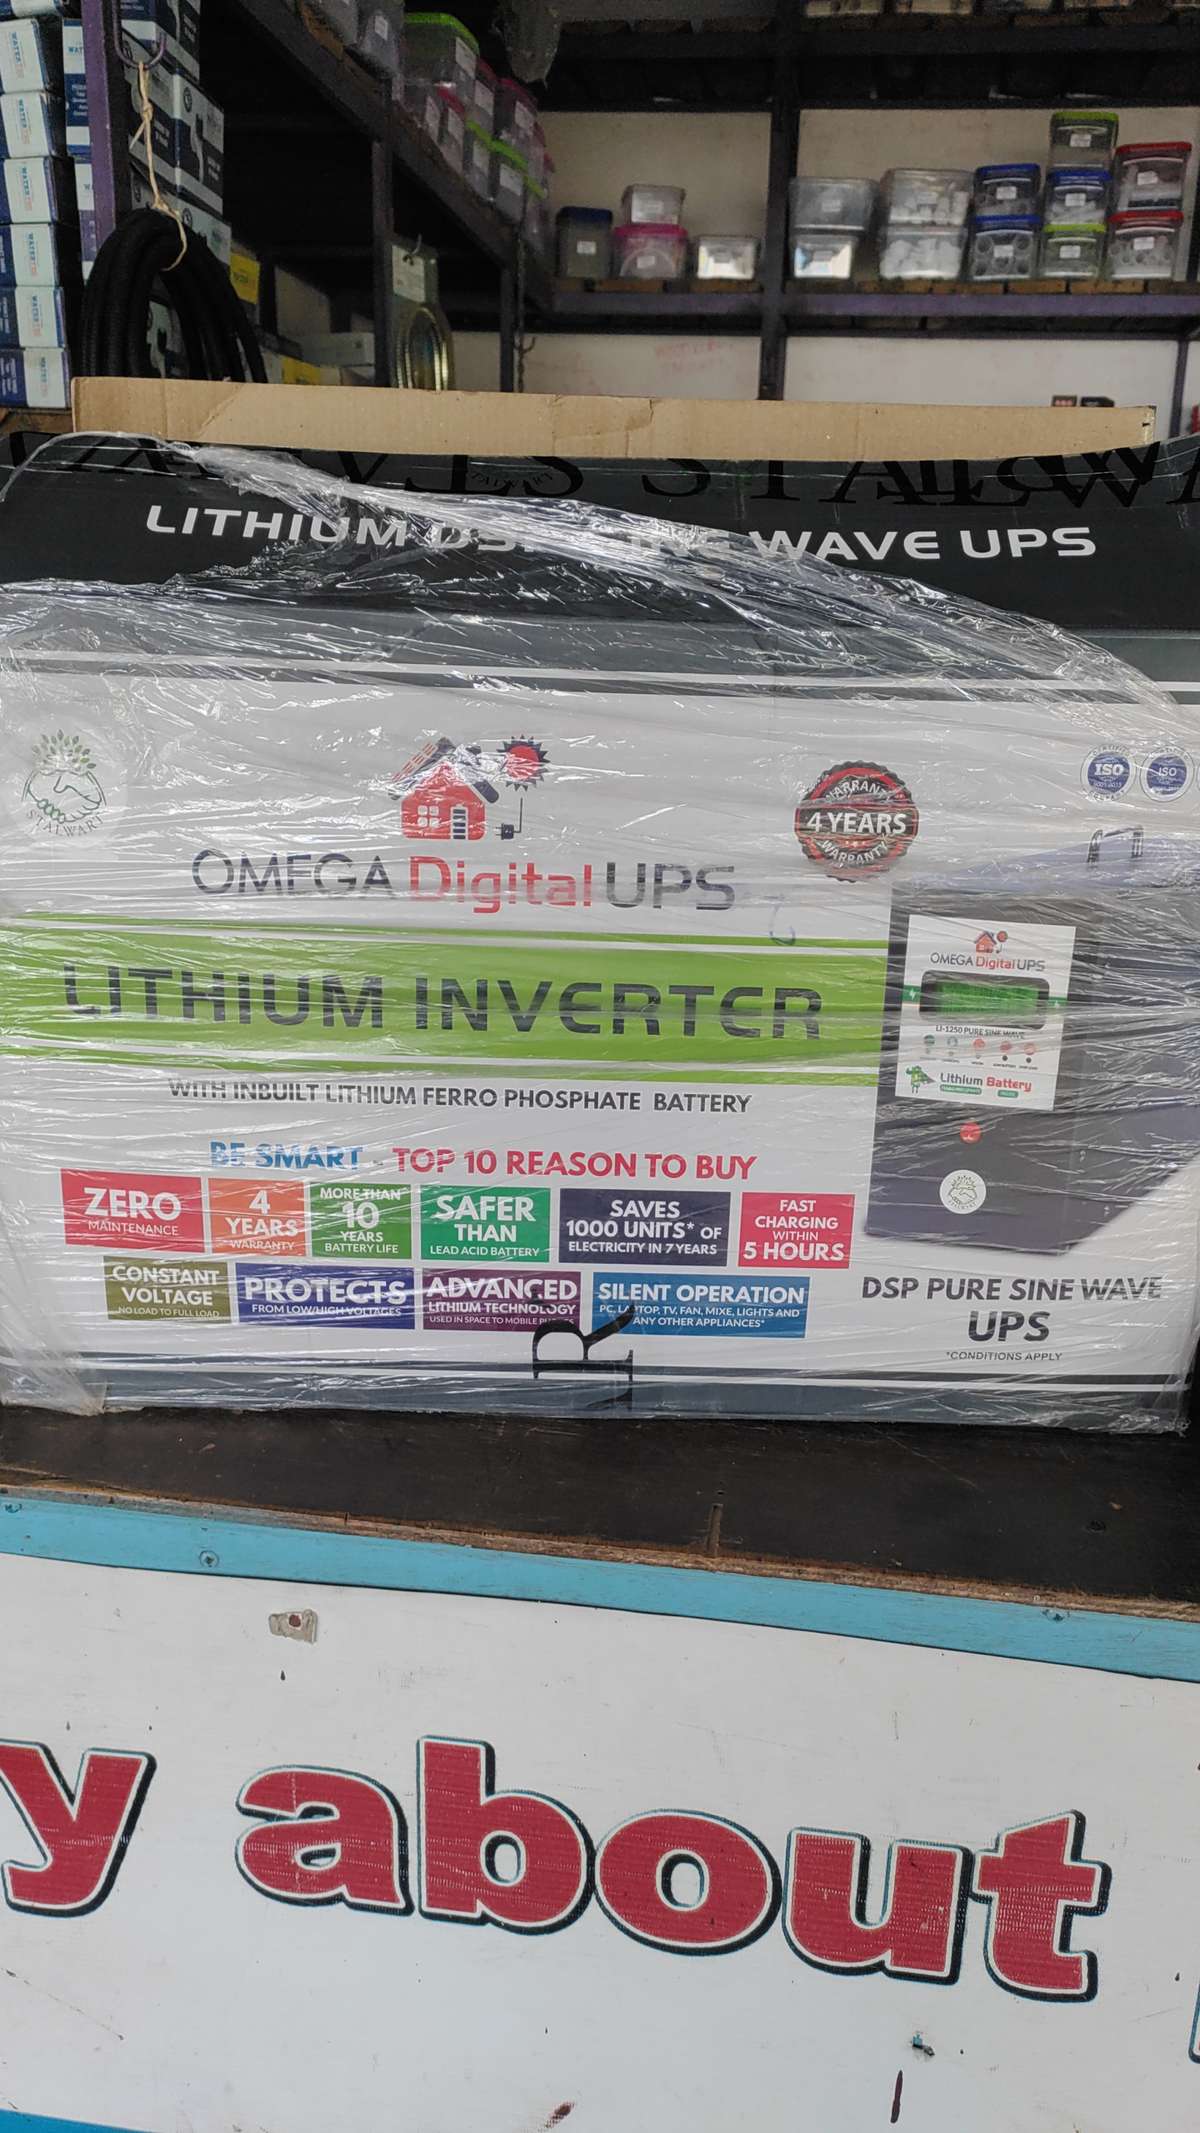 lithium battery invertor 
four years warranty
full charge within 5 hrs
no need of battery water
zero maintenance

now at very  least price Rs. 25500/-